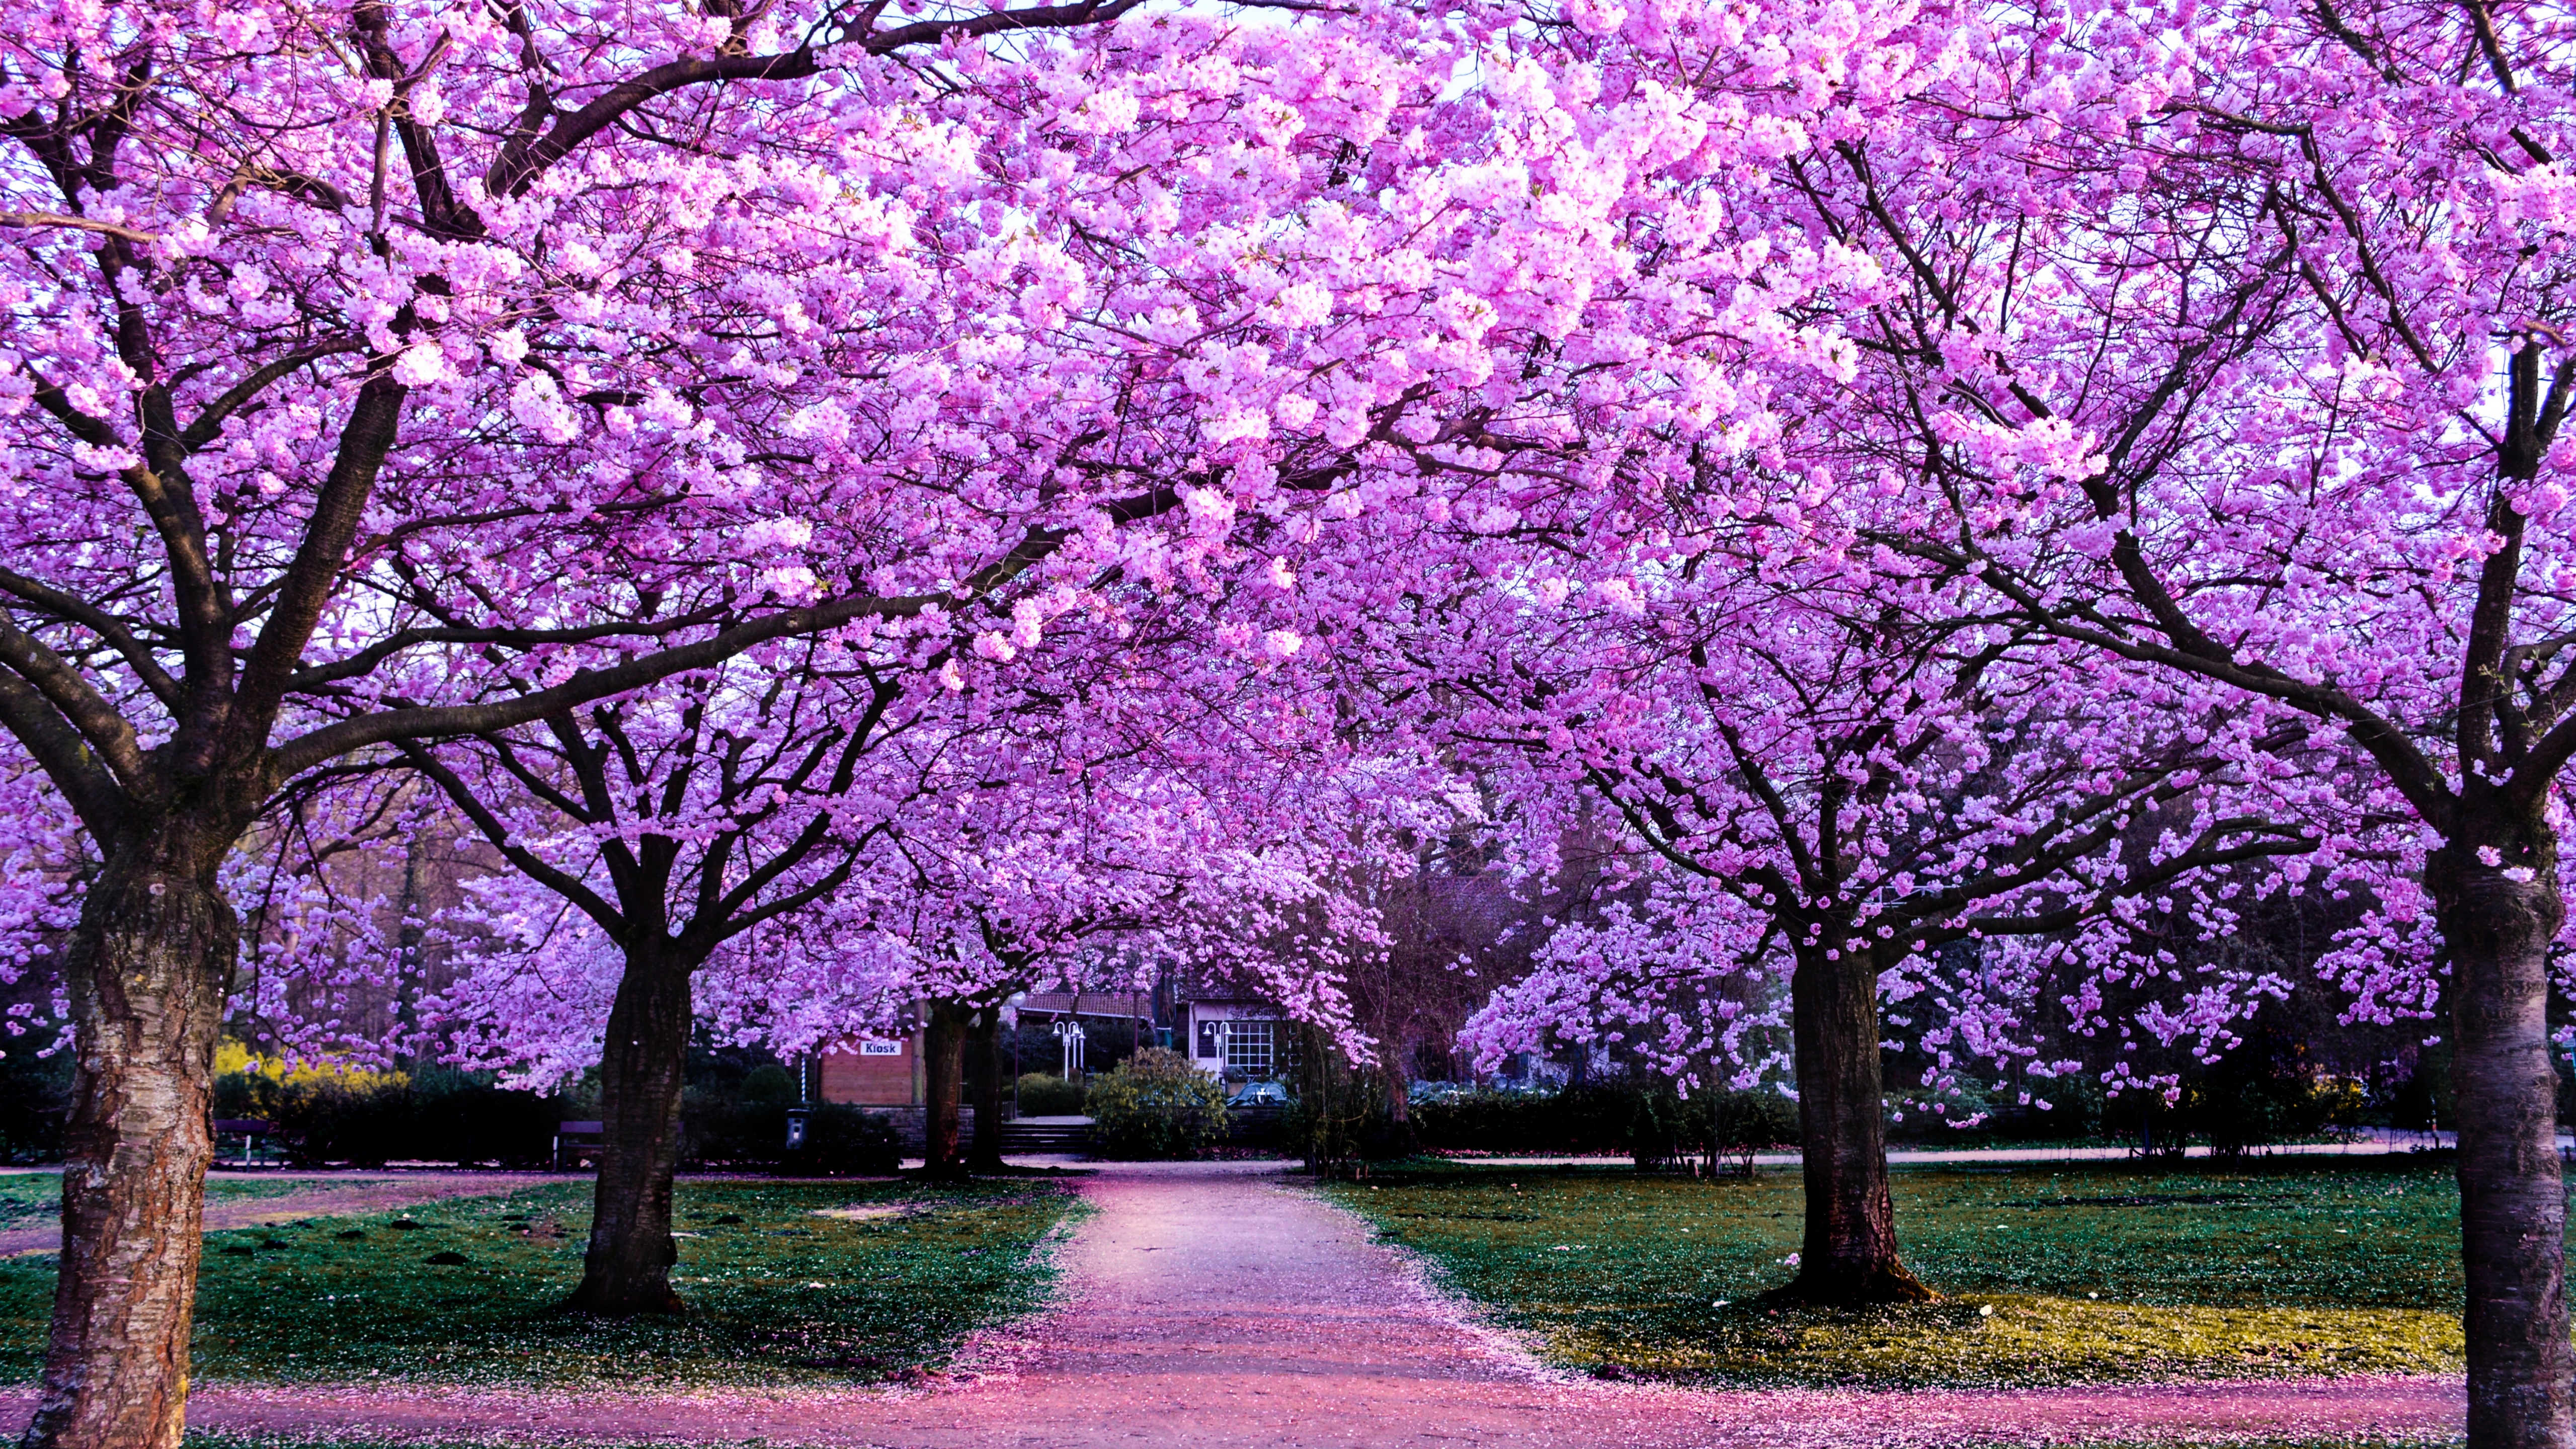 Wallpaper iPhone/spring/flowers/beauty ❤ | Cherry blossom japan, Cherry  blossom, Blossom trees